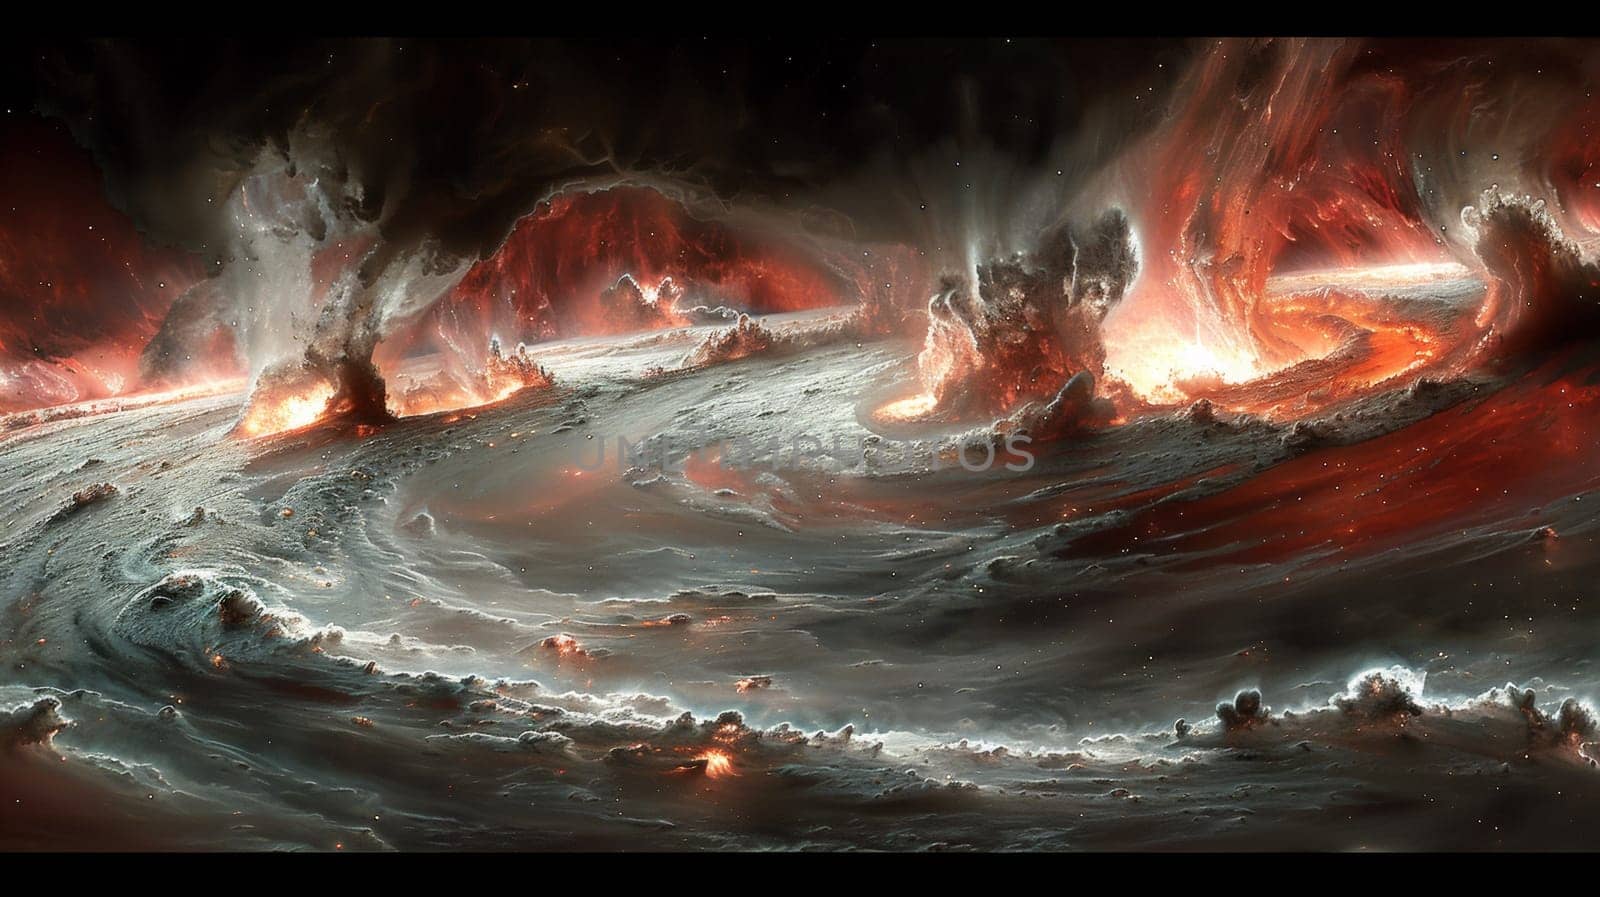 A painting of a swirling vortex with fire and water